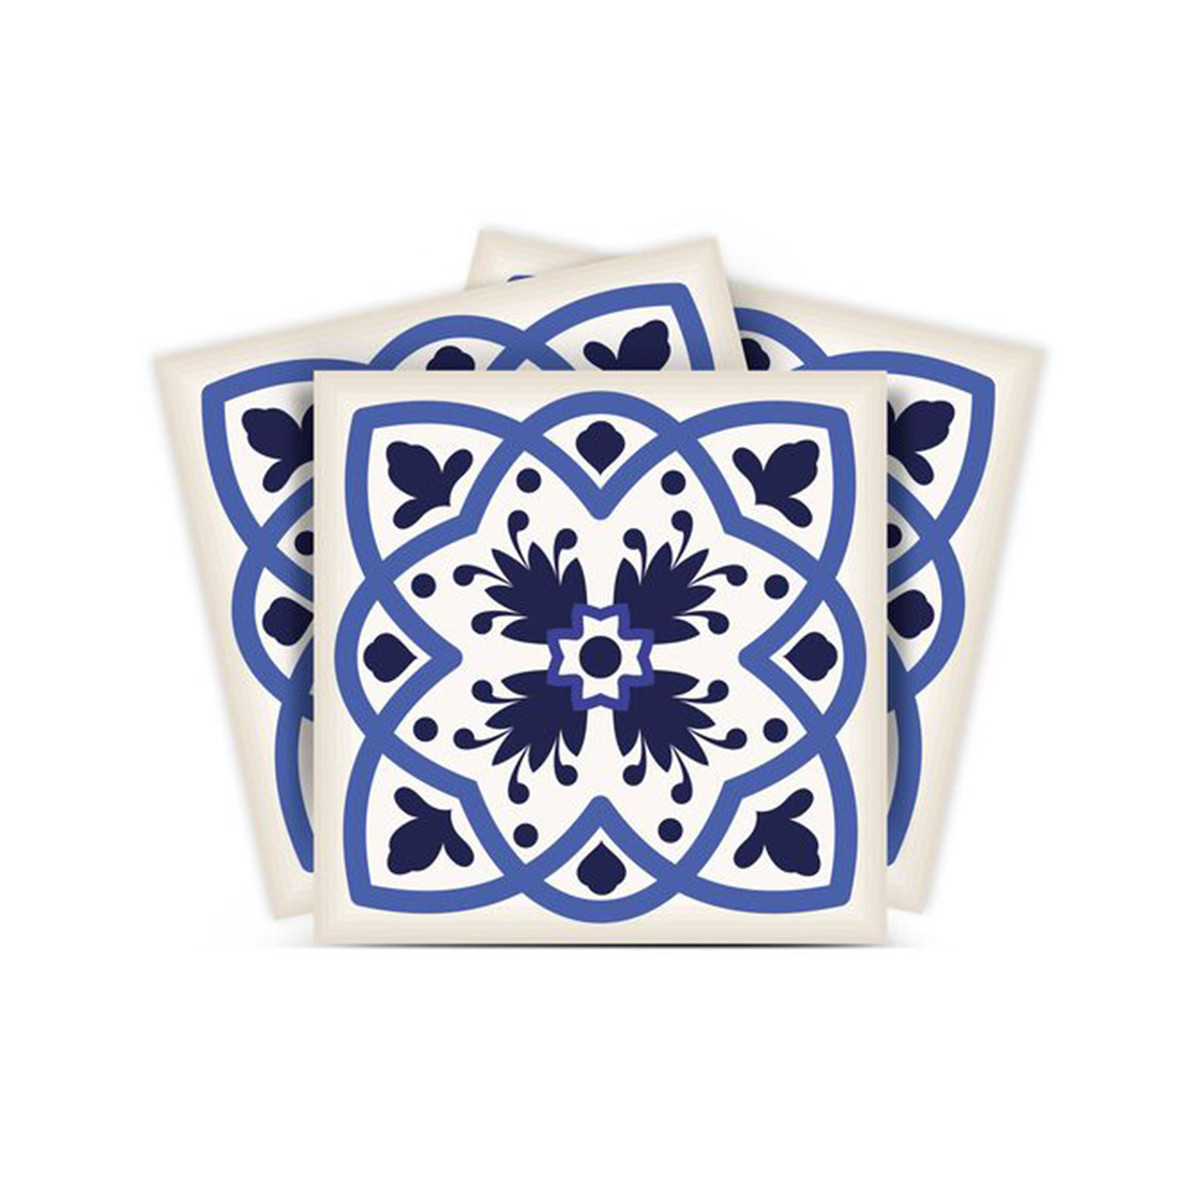 6" X 6" Blue And White Mosaic Peel And Stick Removable Tiles-399827-1